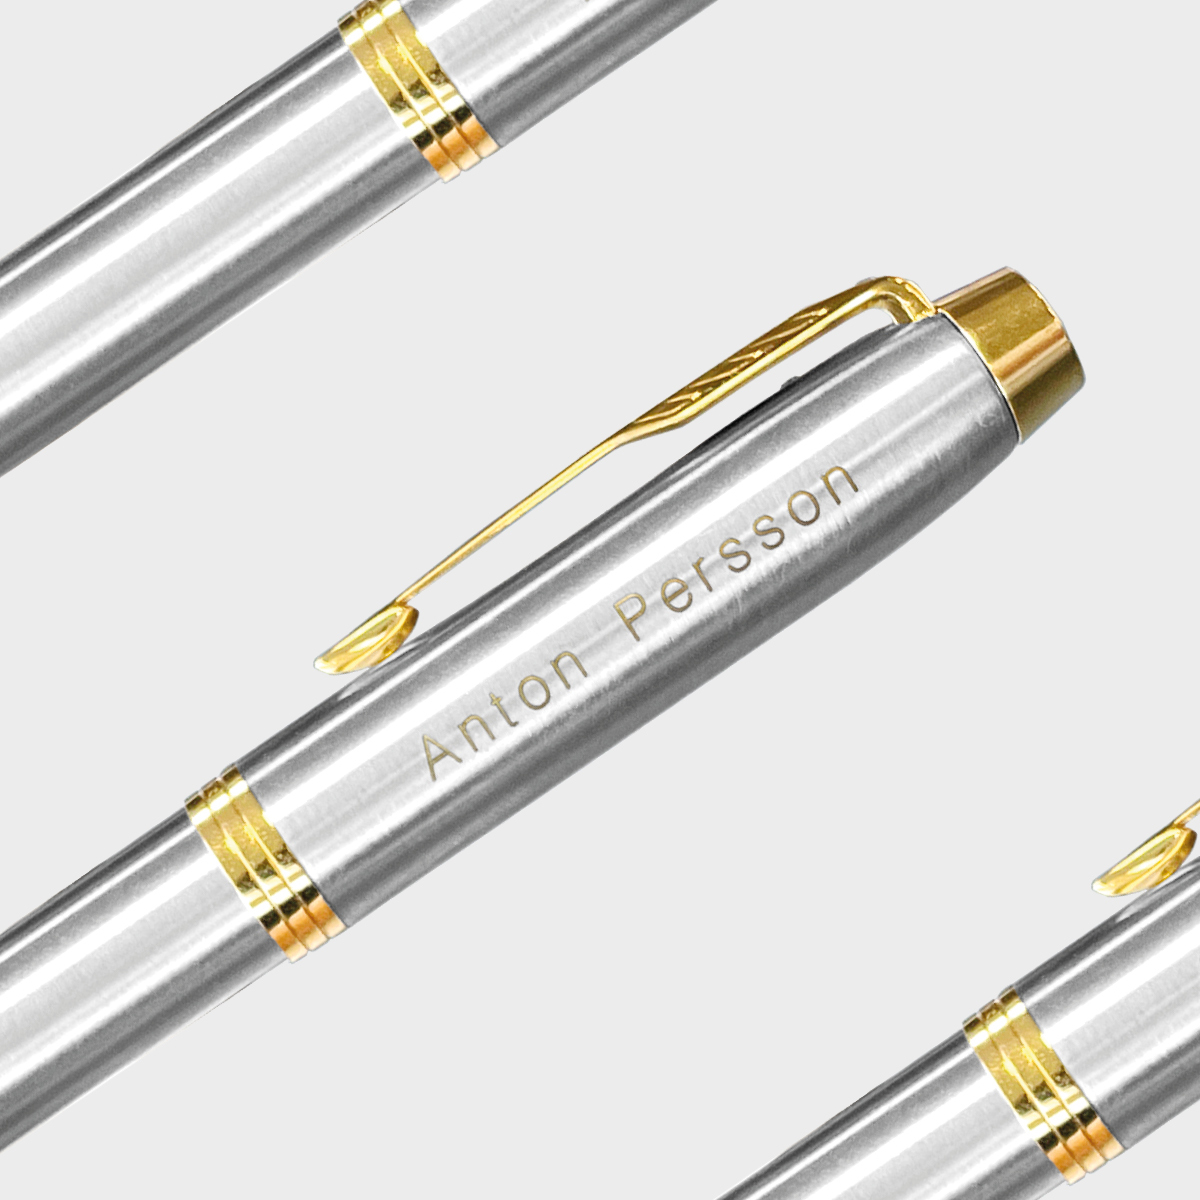 IM Brushed/Gold Rollerball in the group Pens / Fine Writing / Rollerball Pens at Pen Store (104677)